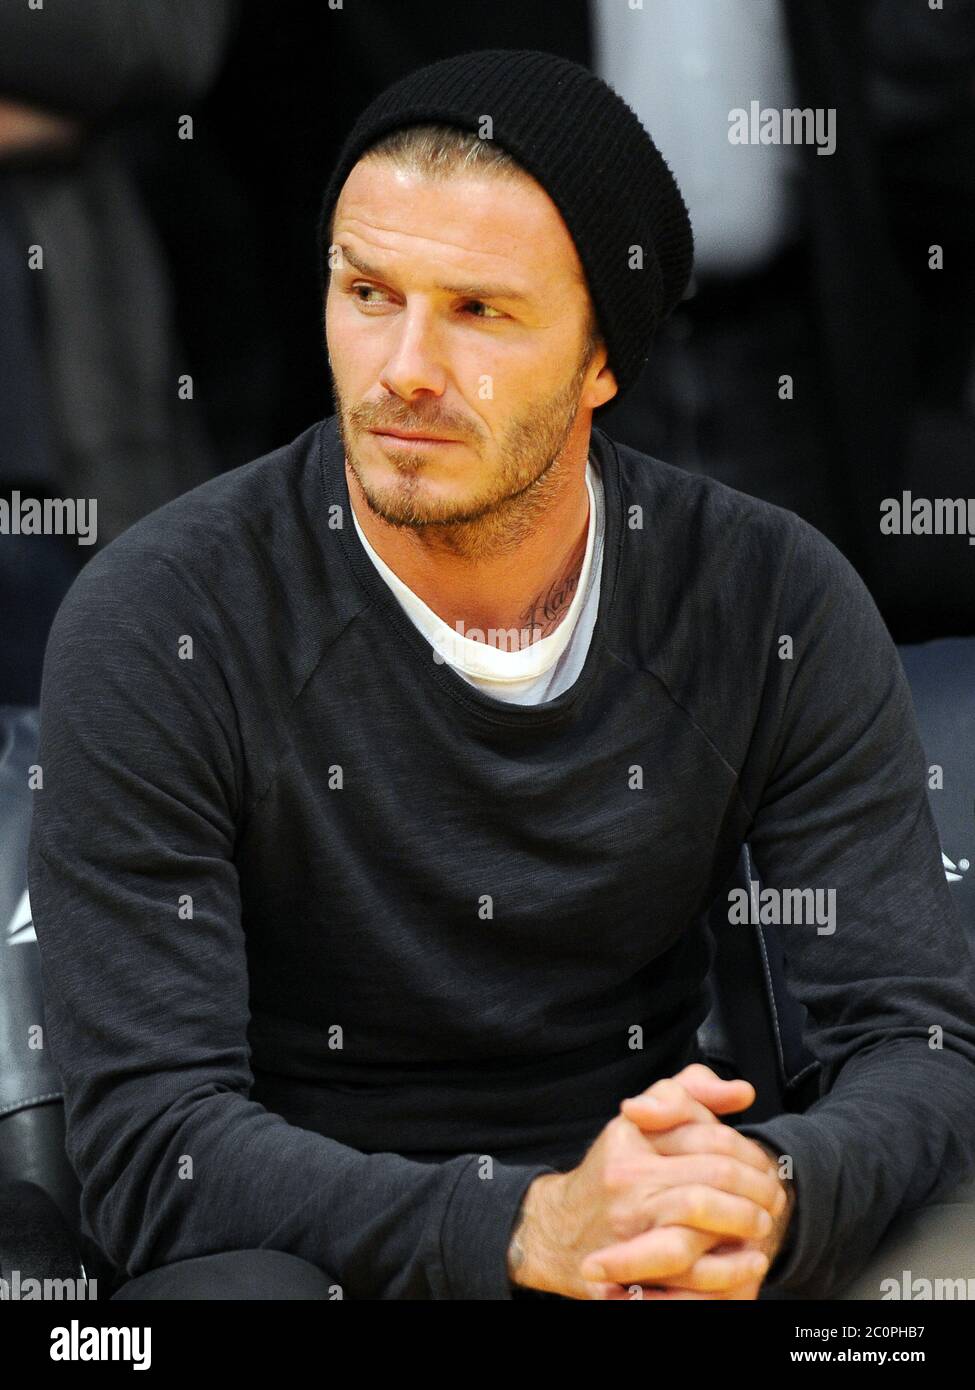 David Beckham watches the LA Lakers v Indiana Pacers in the NBA, Staples Center, Los Angeles, California with LA Galaxy equipment man Raul Vargas. 27 November 2012 Stock Photo